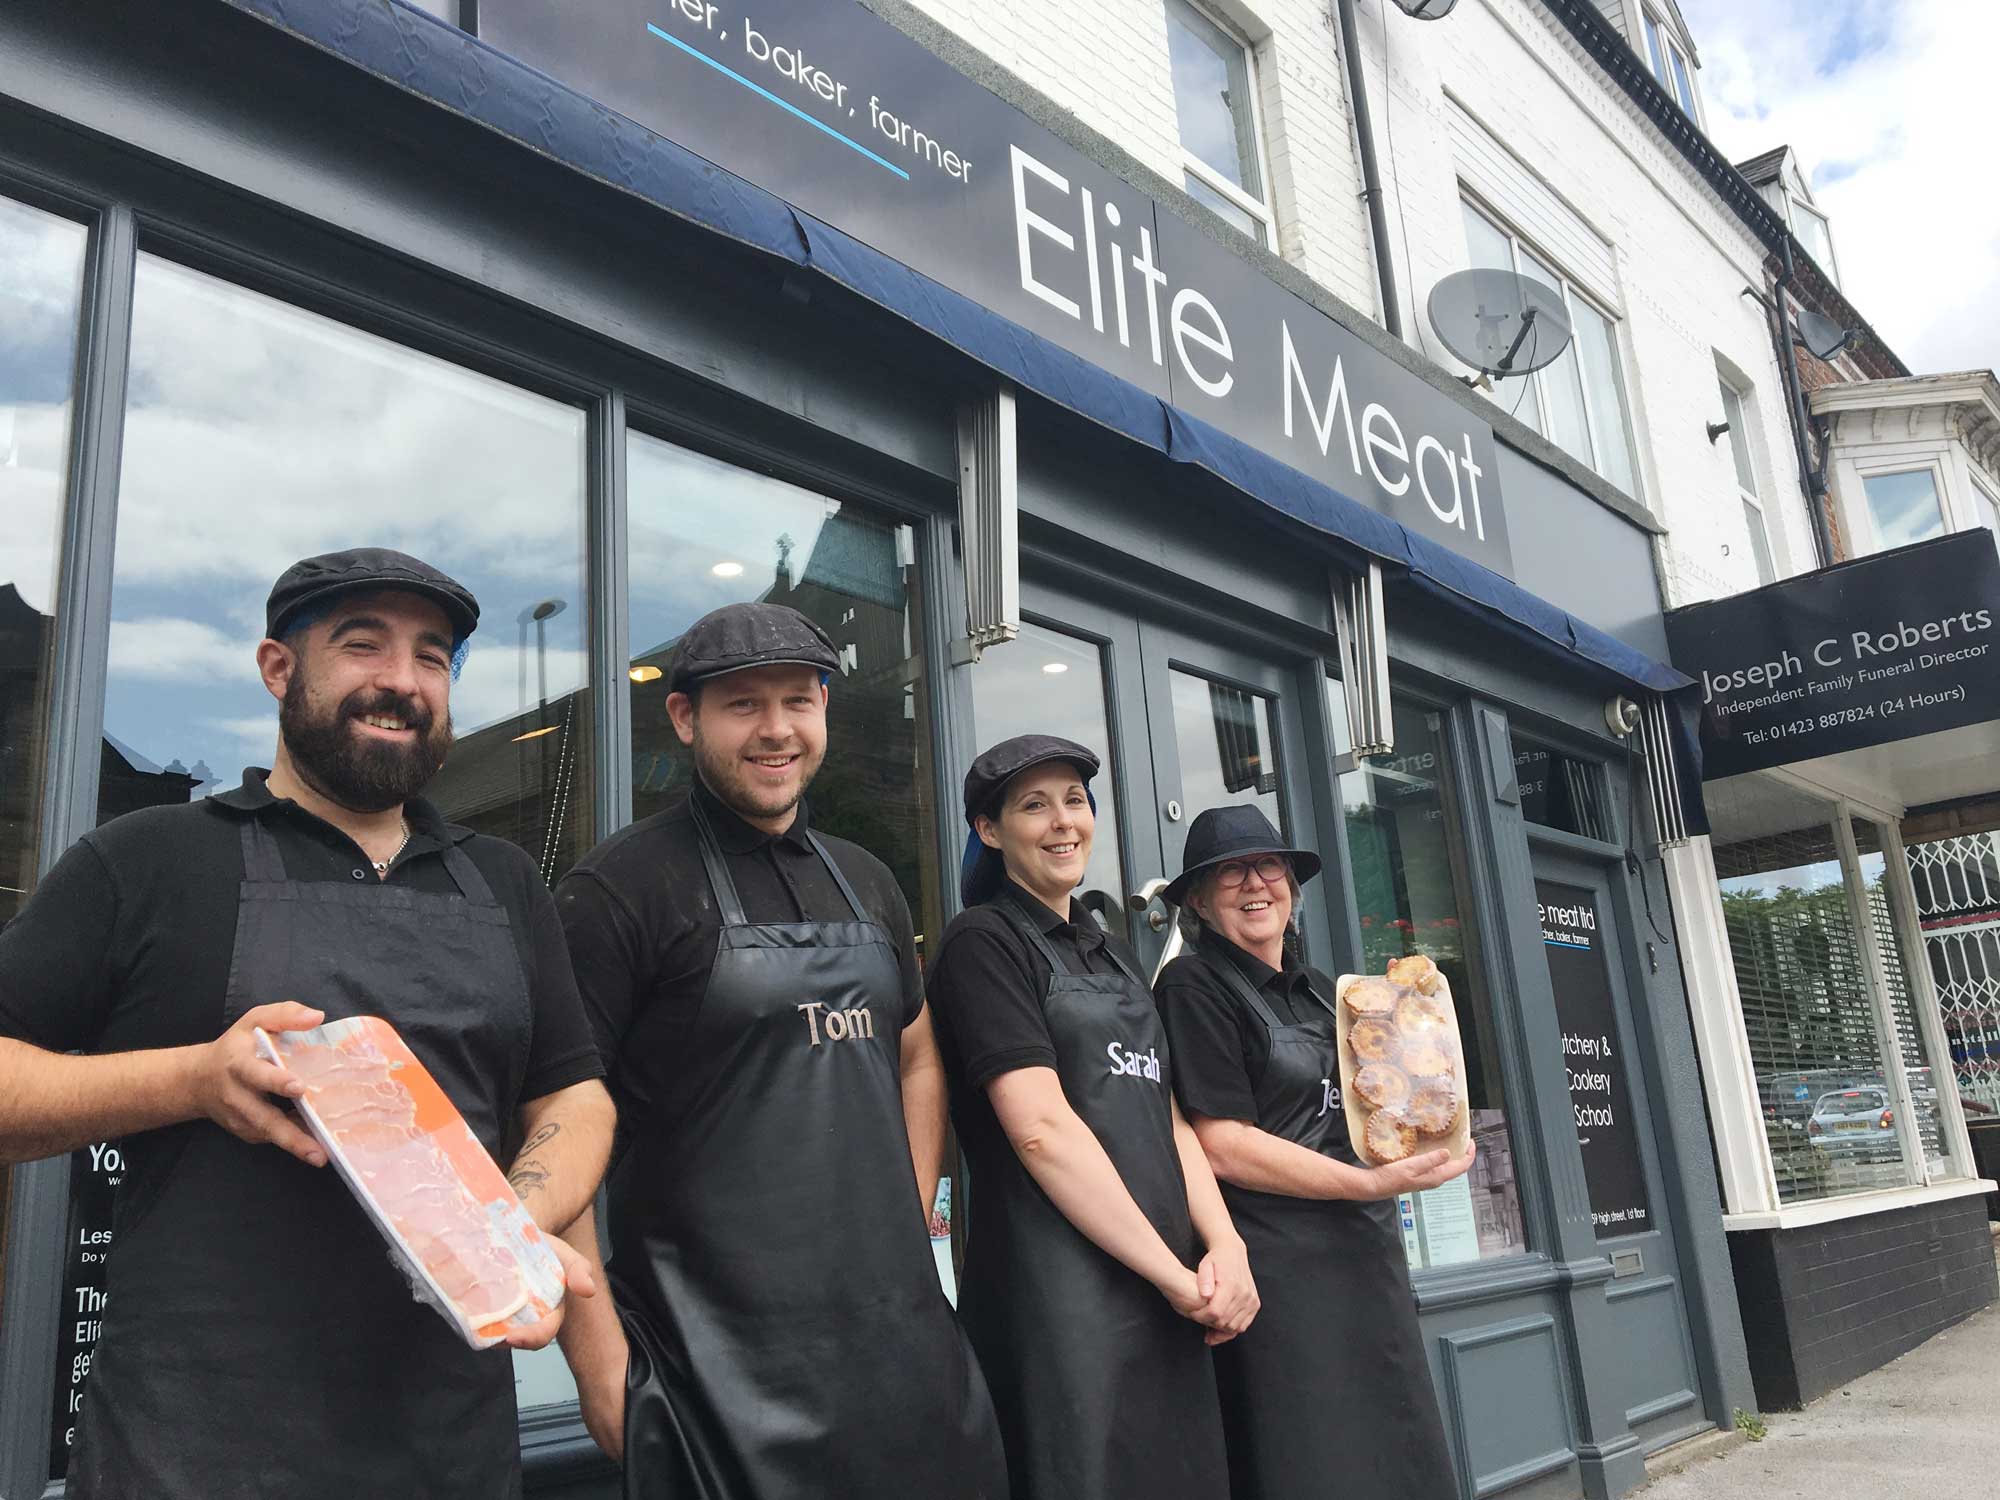 Members of the butchery brigade are pictured outside Elite Meat’s Starbeck premises, voted the Best Family-Run Butchers in the UK, with the shop’s two Great Taste Awards 2-star products